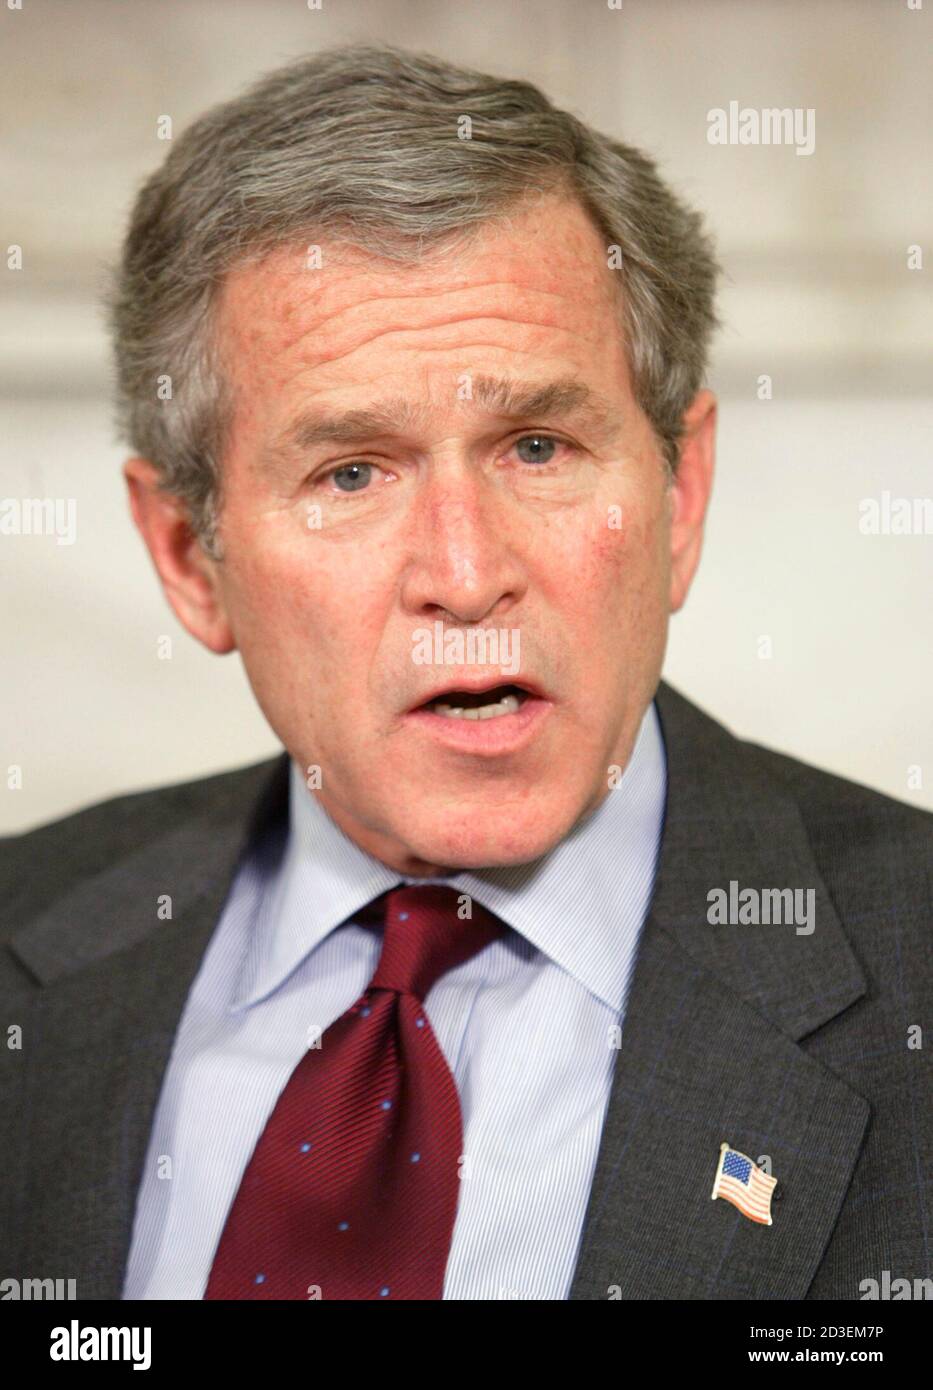 President George W. Bush speaks during a meeting with congressional leaders in the Oval Office of the White House March 21, 2003. Bush held the meeting to brief the leaders on the war in Iraq and to discuss domestic issues. The White House today said that the war in Iraq could still be 'lengthy and dangerous' and there were 'many risks ahead' for U.S. and British forces. REUTERS/Kevin Lamarque  KL Stock Photo